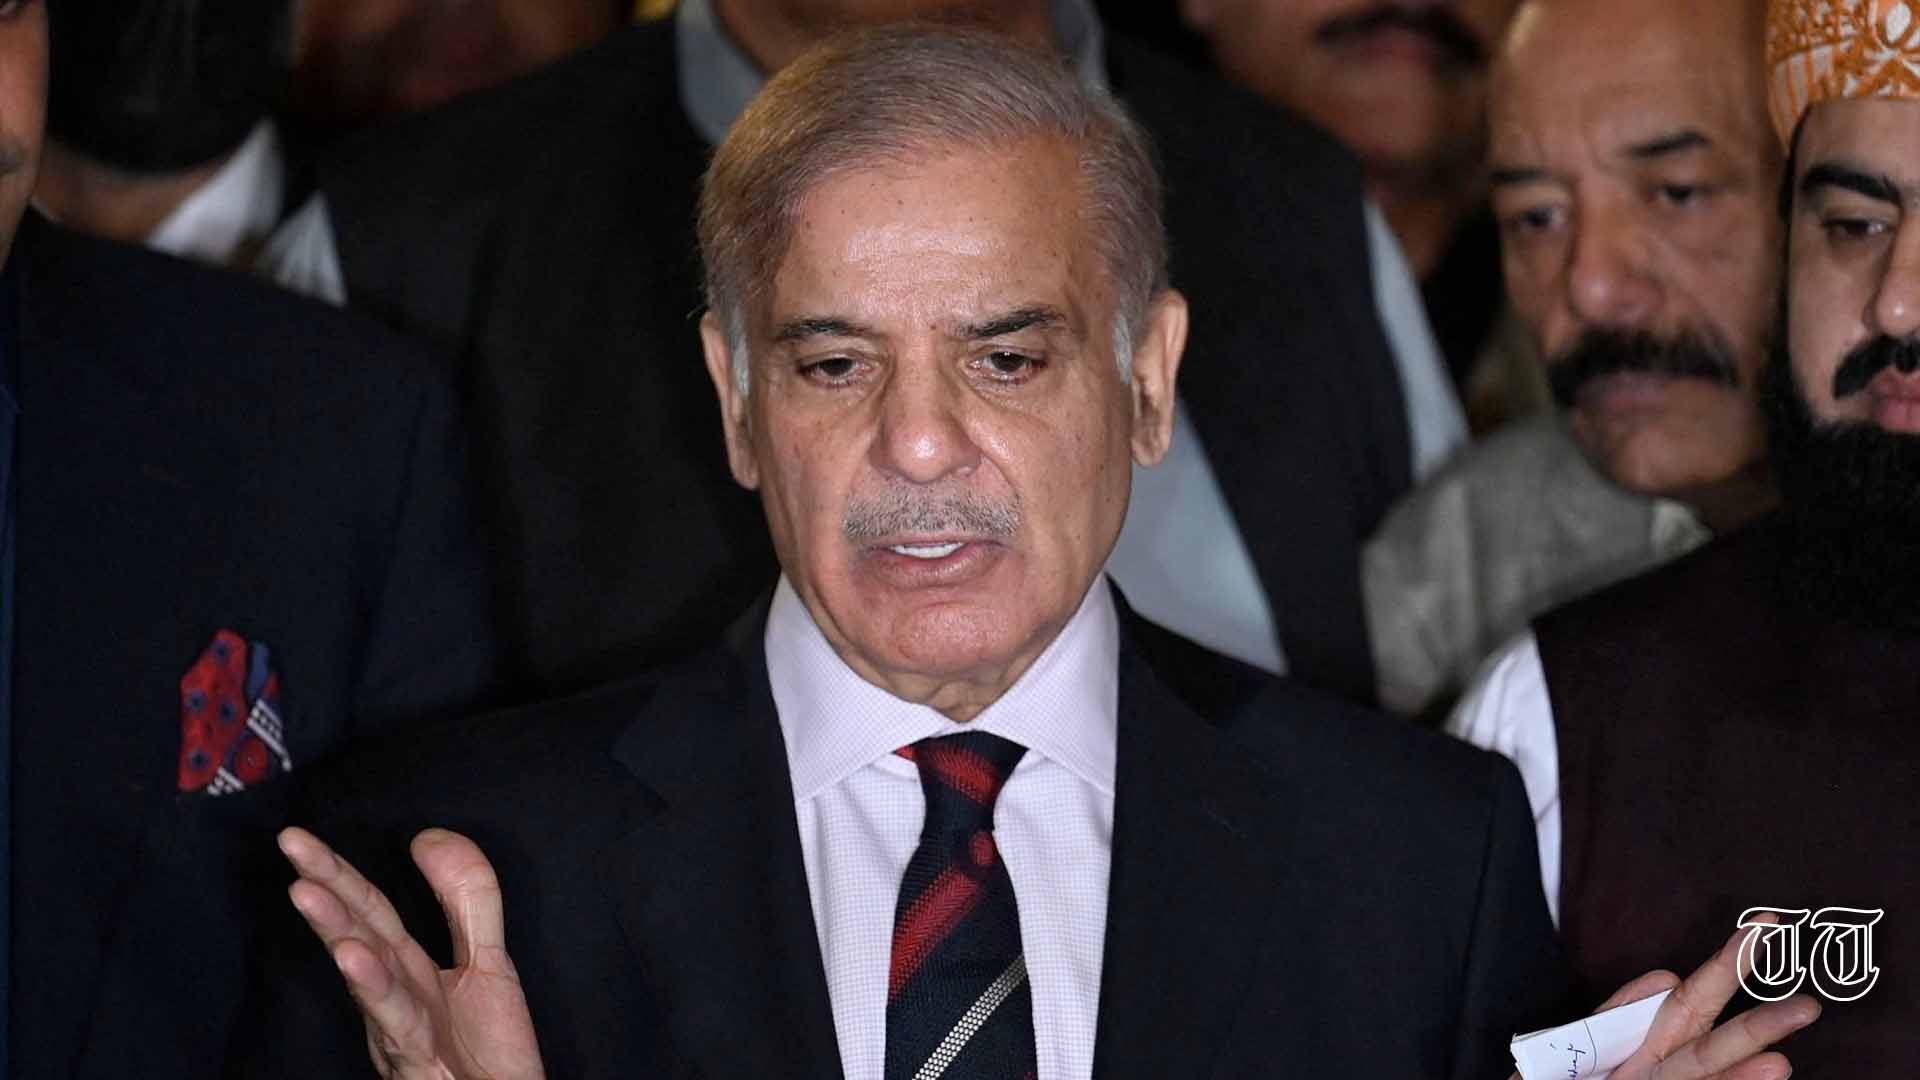 PML(N) president and Pakistani prime minister Shehbaz Sharif is shown in April 2022. — FILE